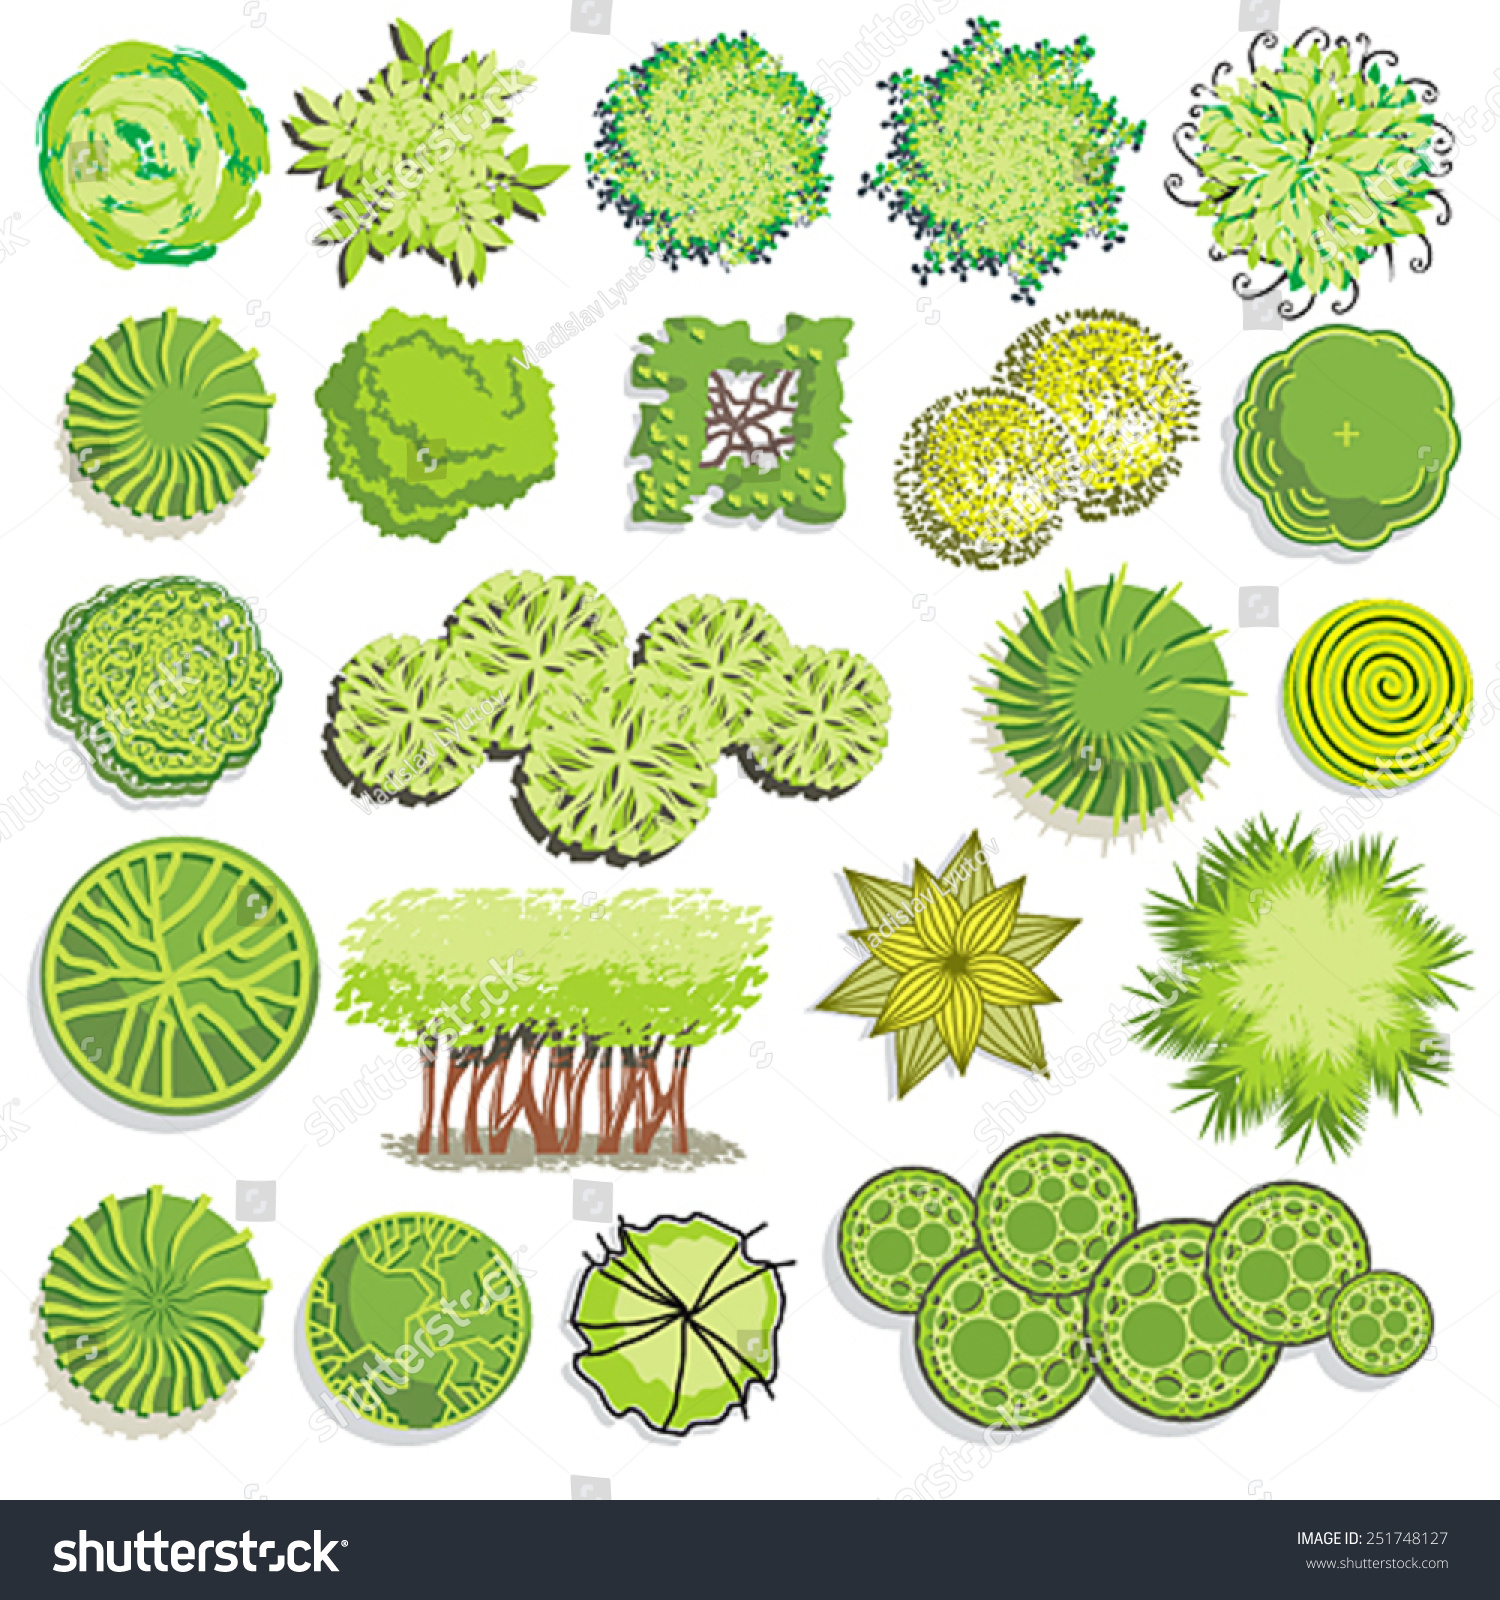 landscaping clipart for design - photo #28